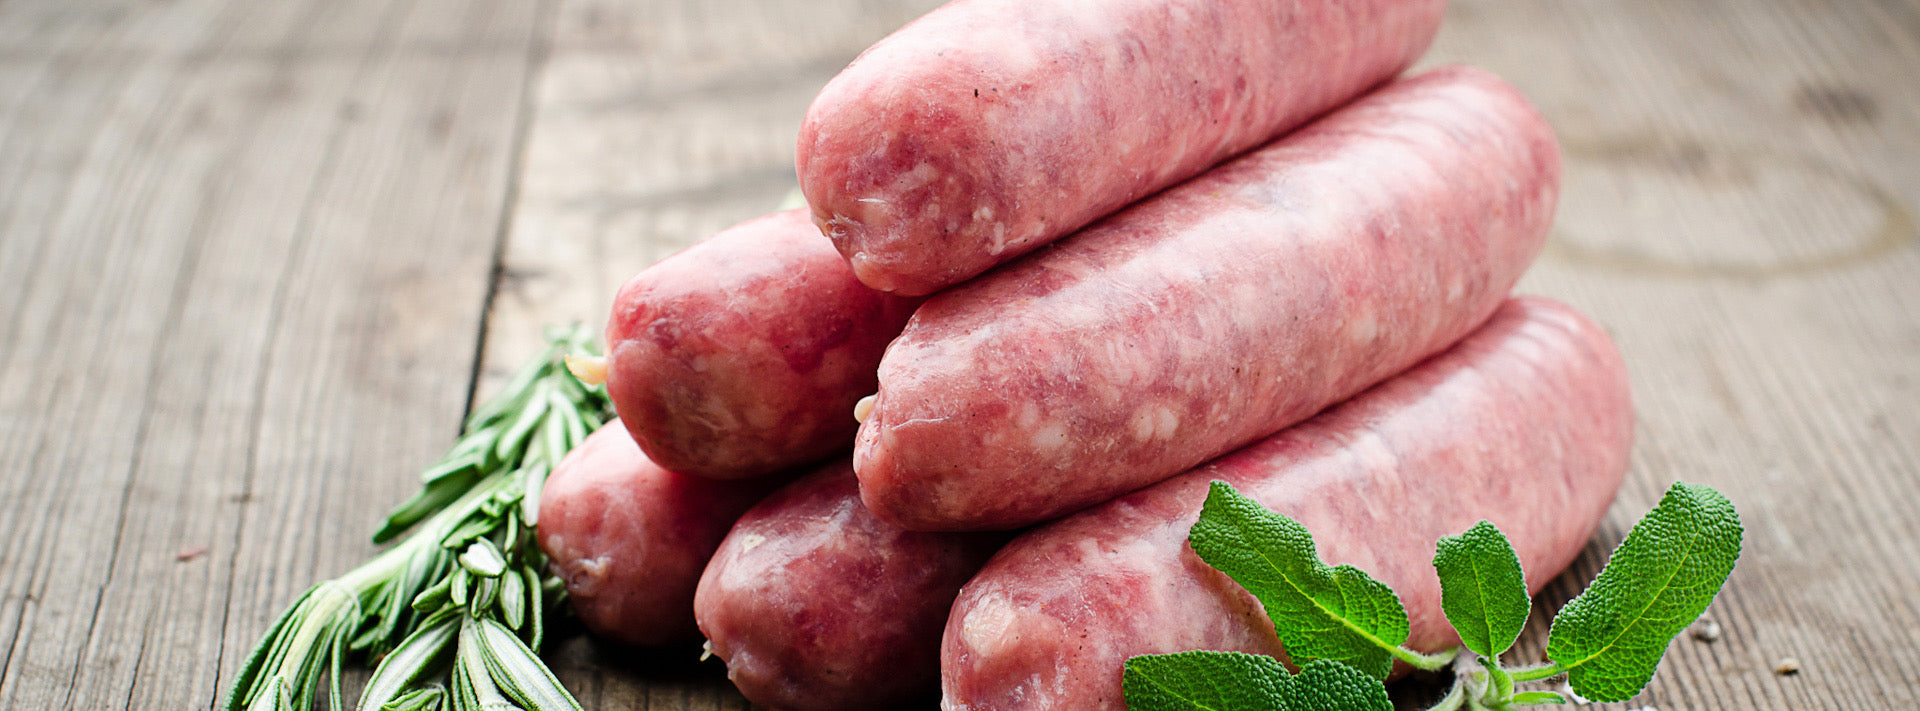 Butchers sausage deal - buy 2 packs and save 50p per pack